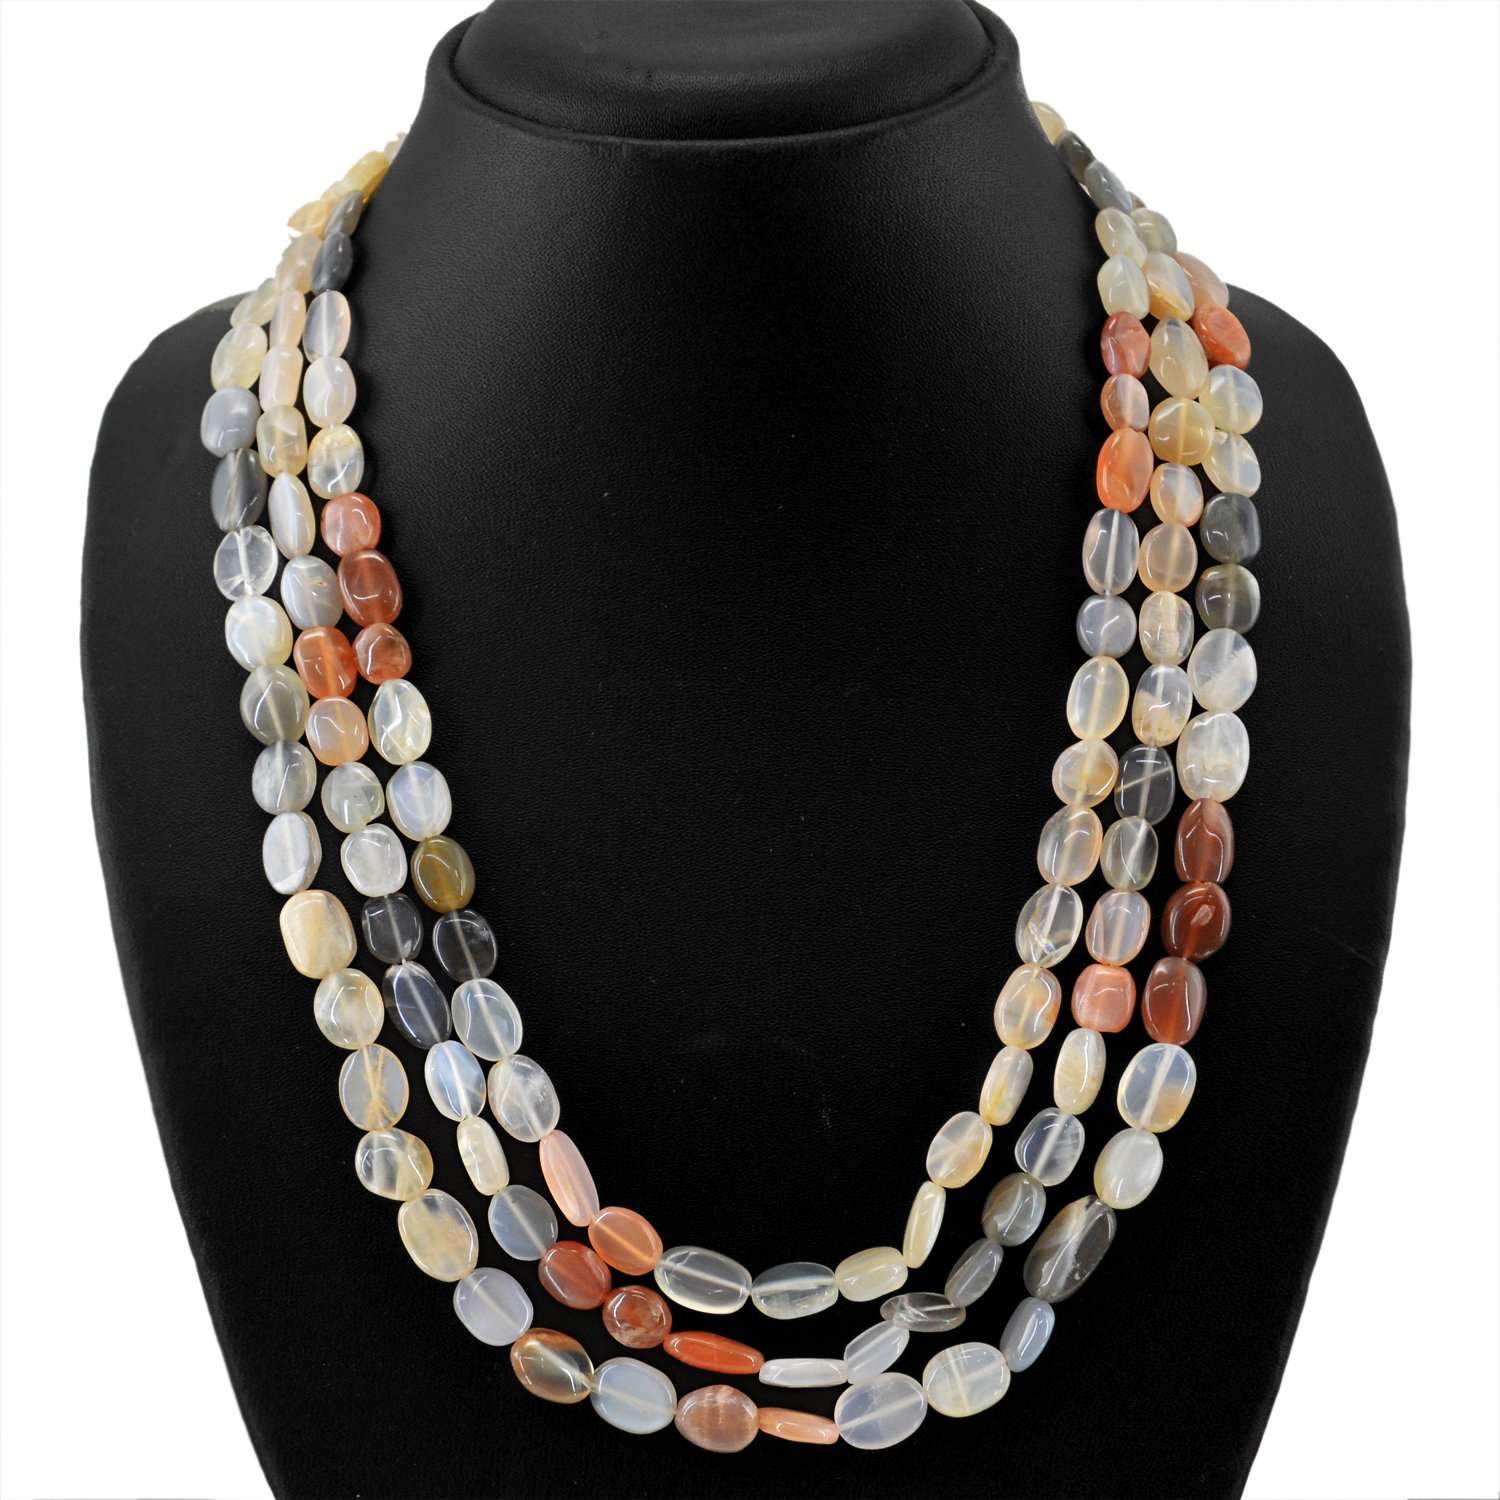 gemsmore:Natural Multicolor Moonstone Necklace 3 Strand Oval Beads